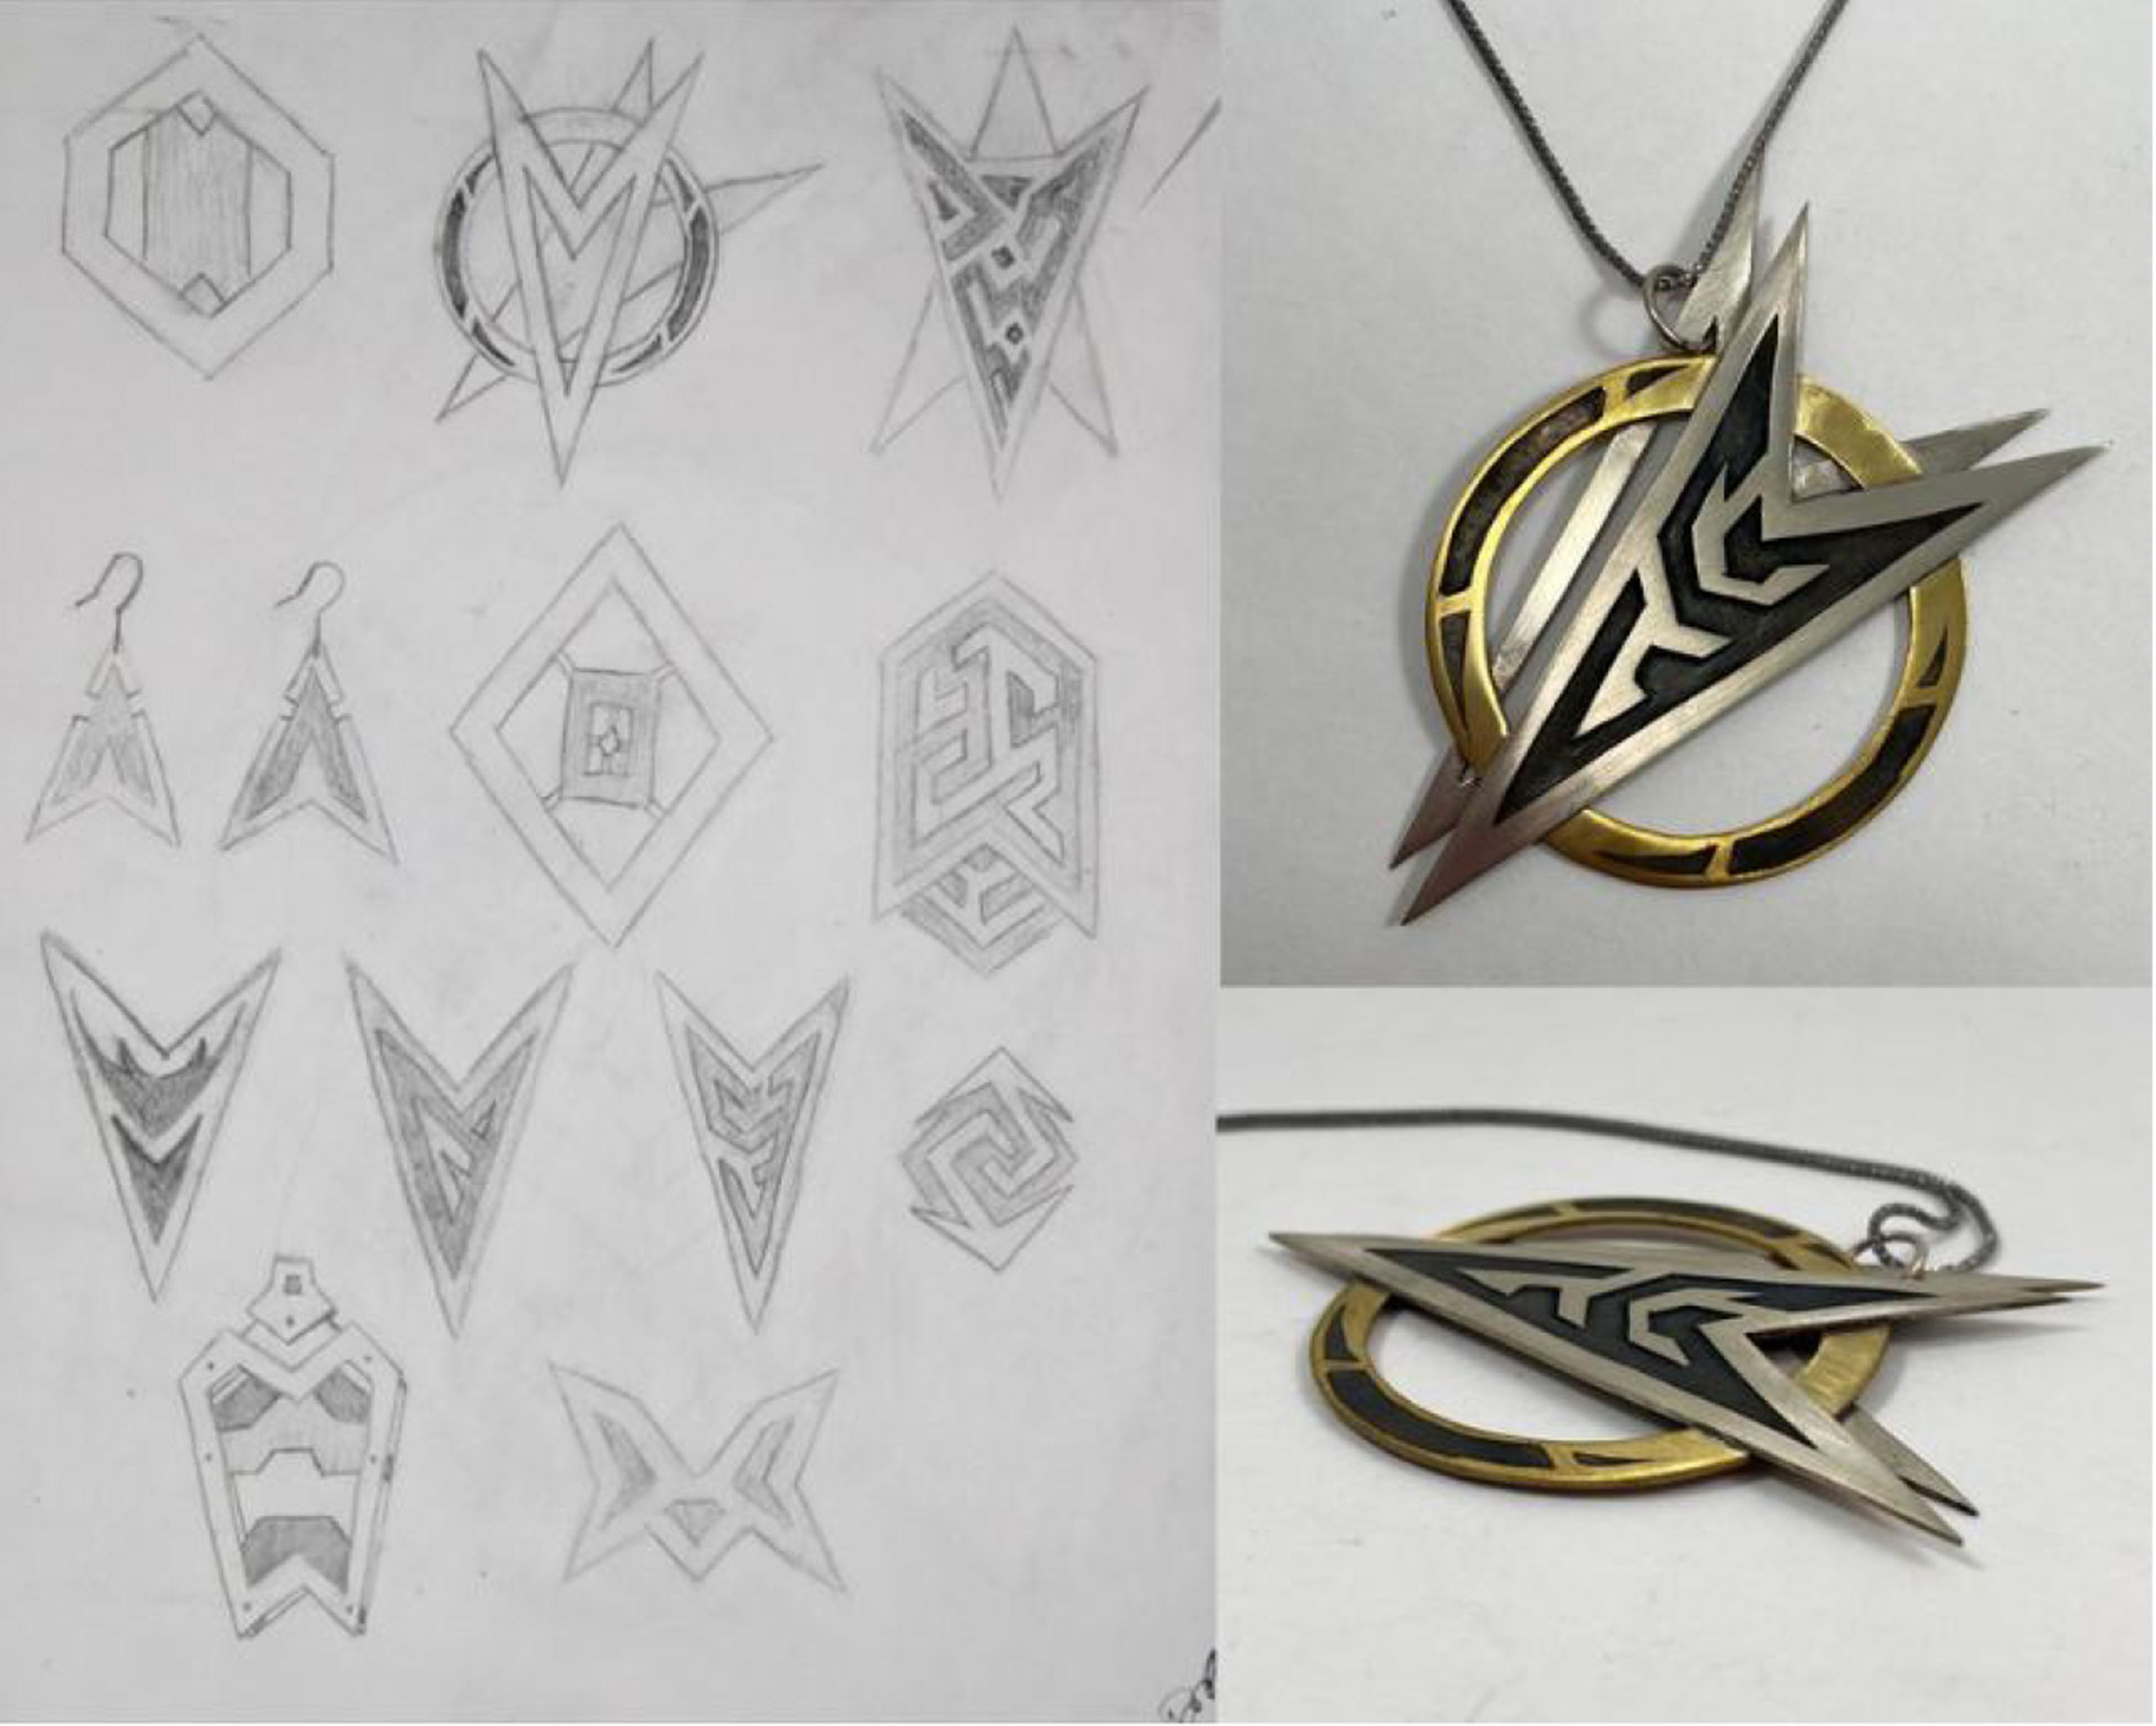 Two photographs, stacked, showing a metal necklace with an arrowhead-like shape placed above a circle, with a diagram of the necklace to the left